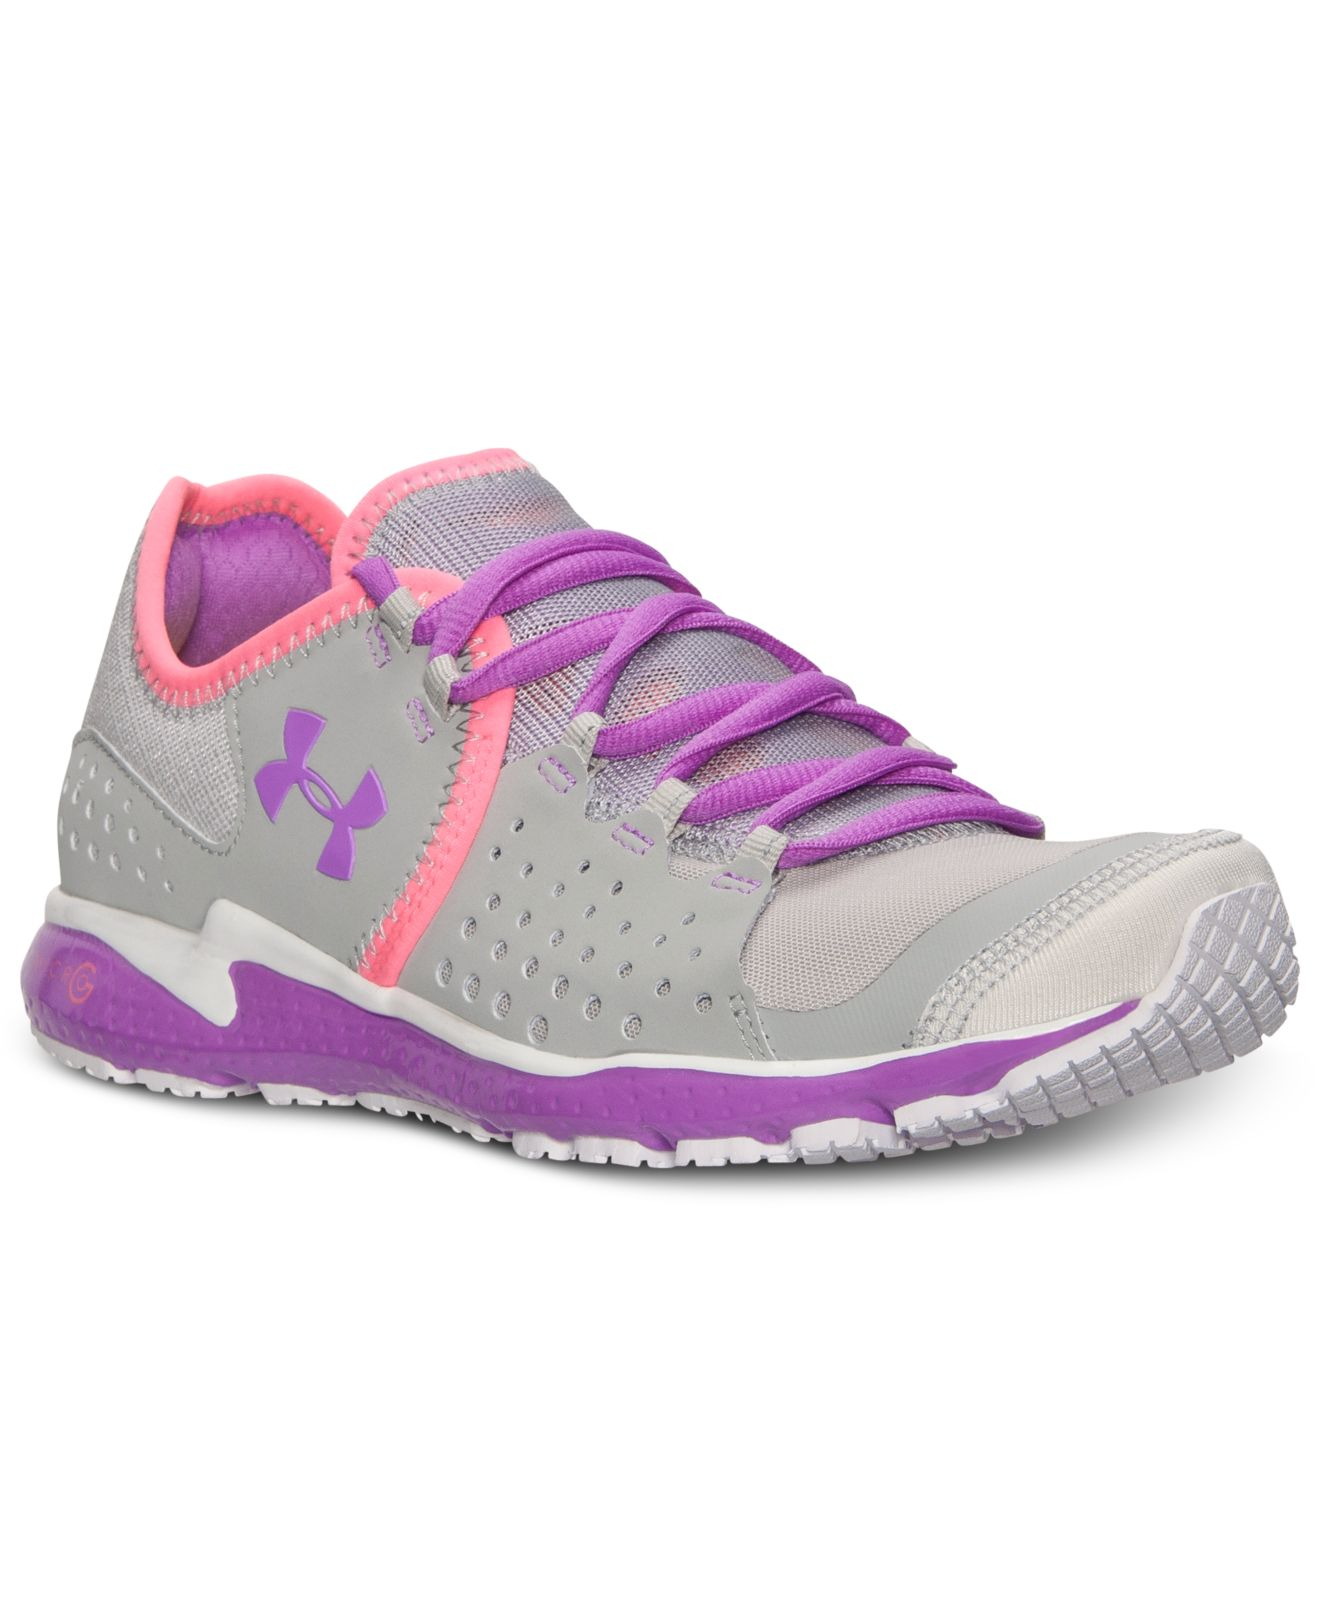 Lyst - Under Armour Women's Micro G Mantis Running Sneakers From Finish ...